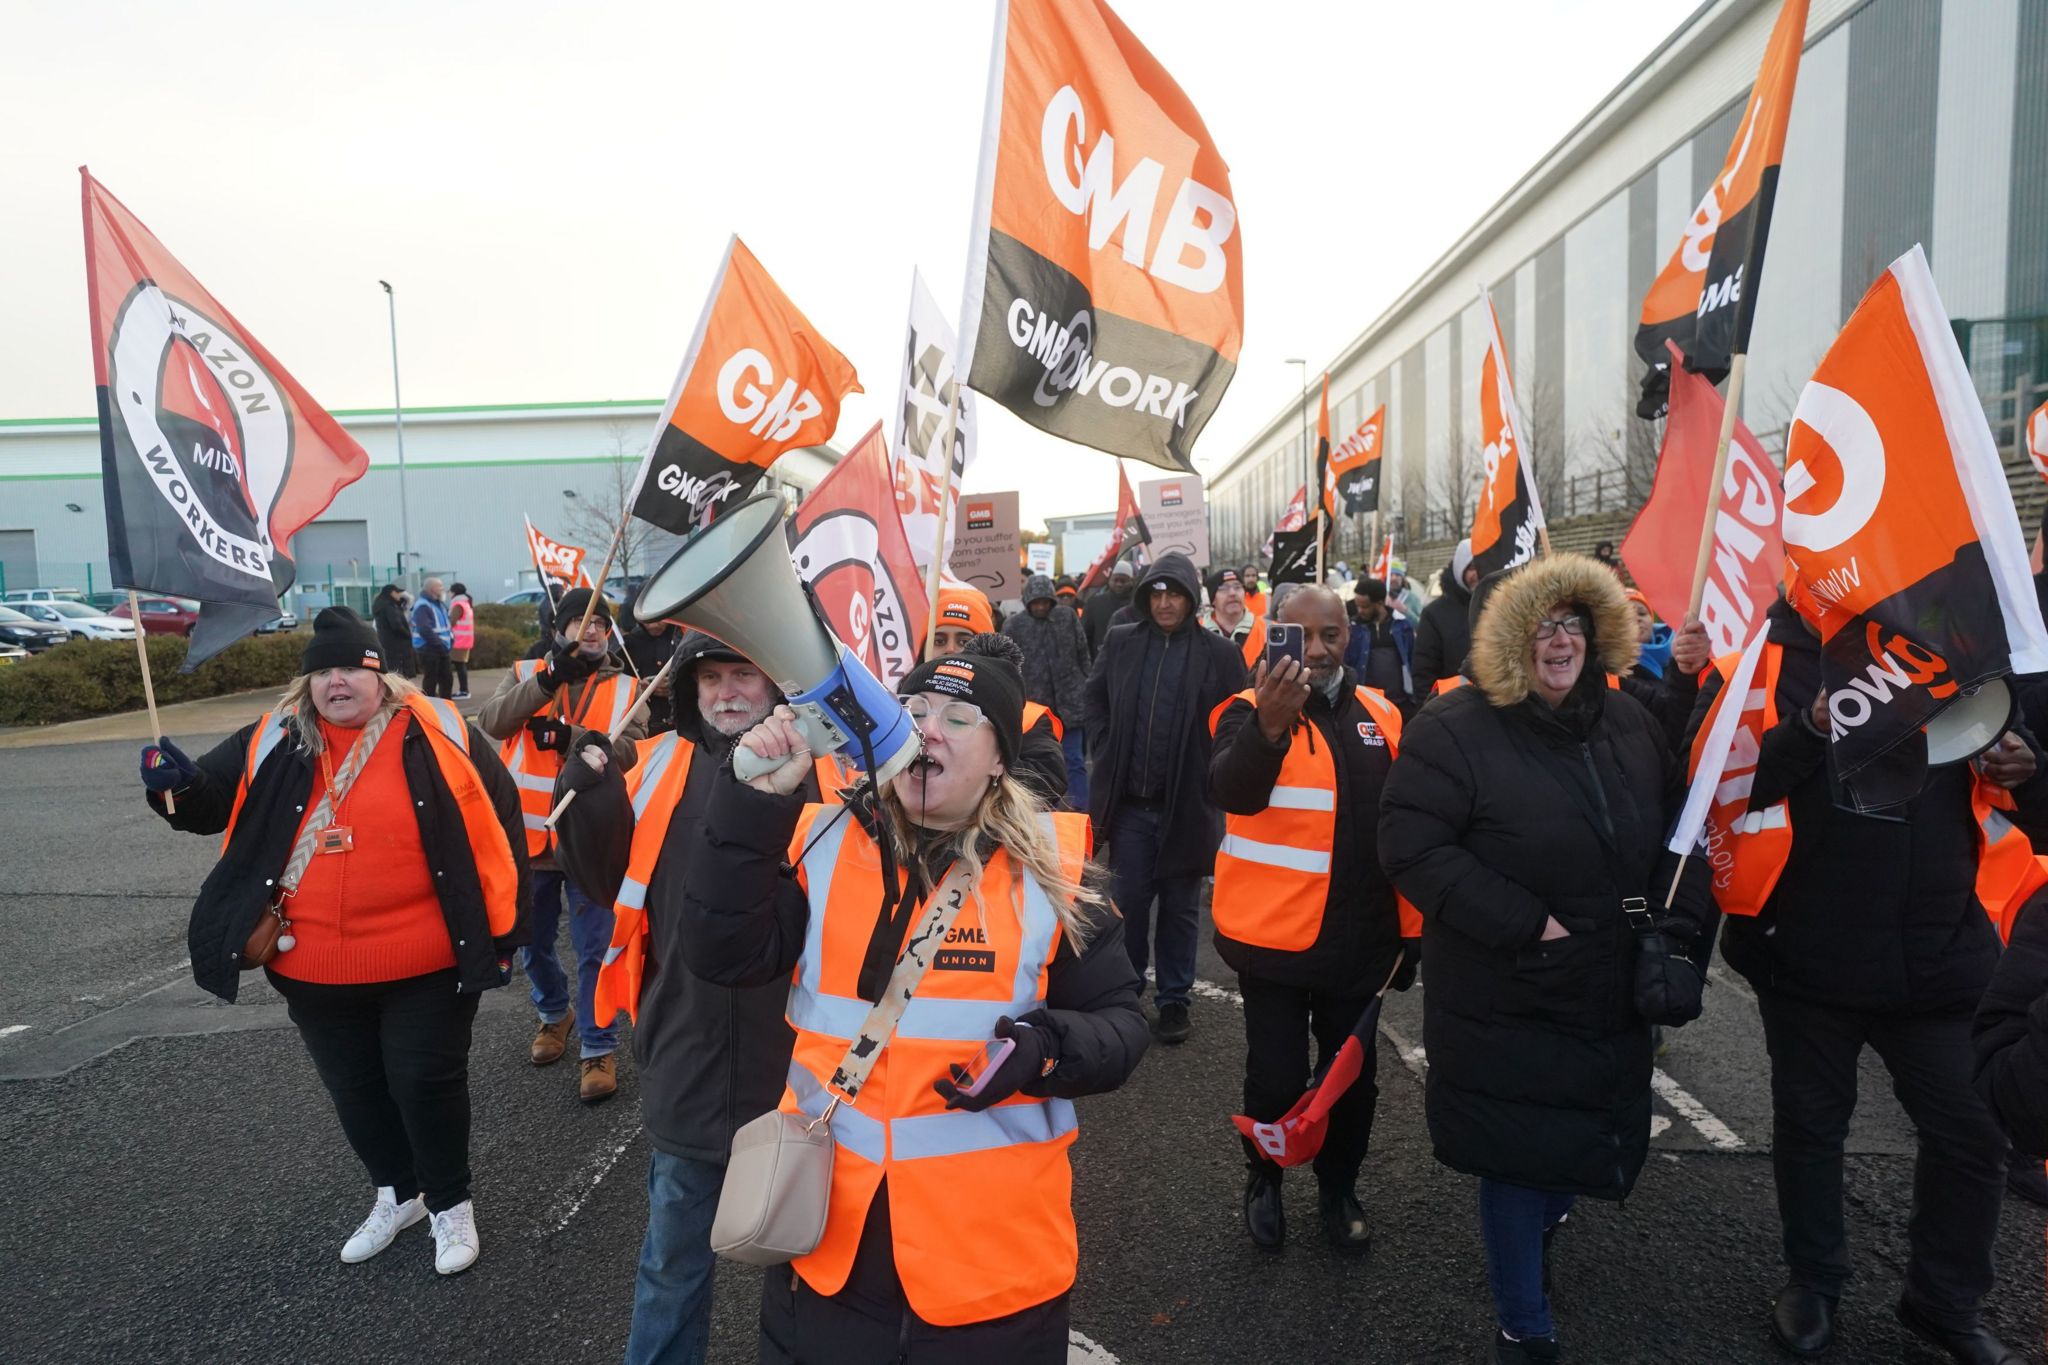 Amazon workers on strike in Coventry